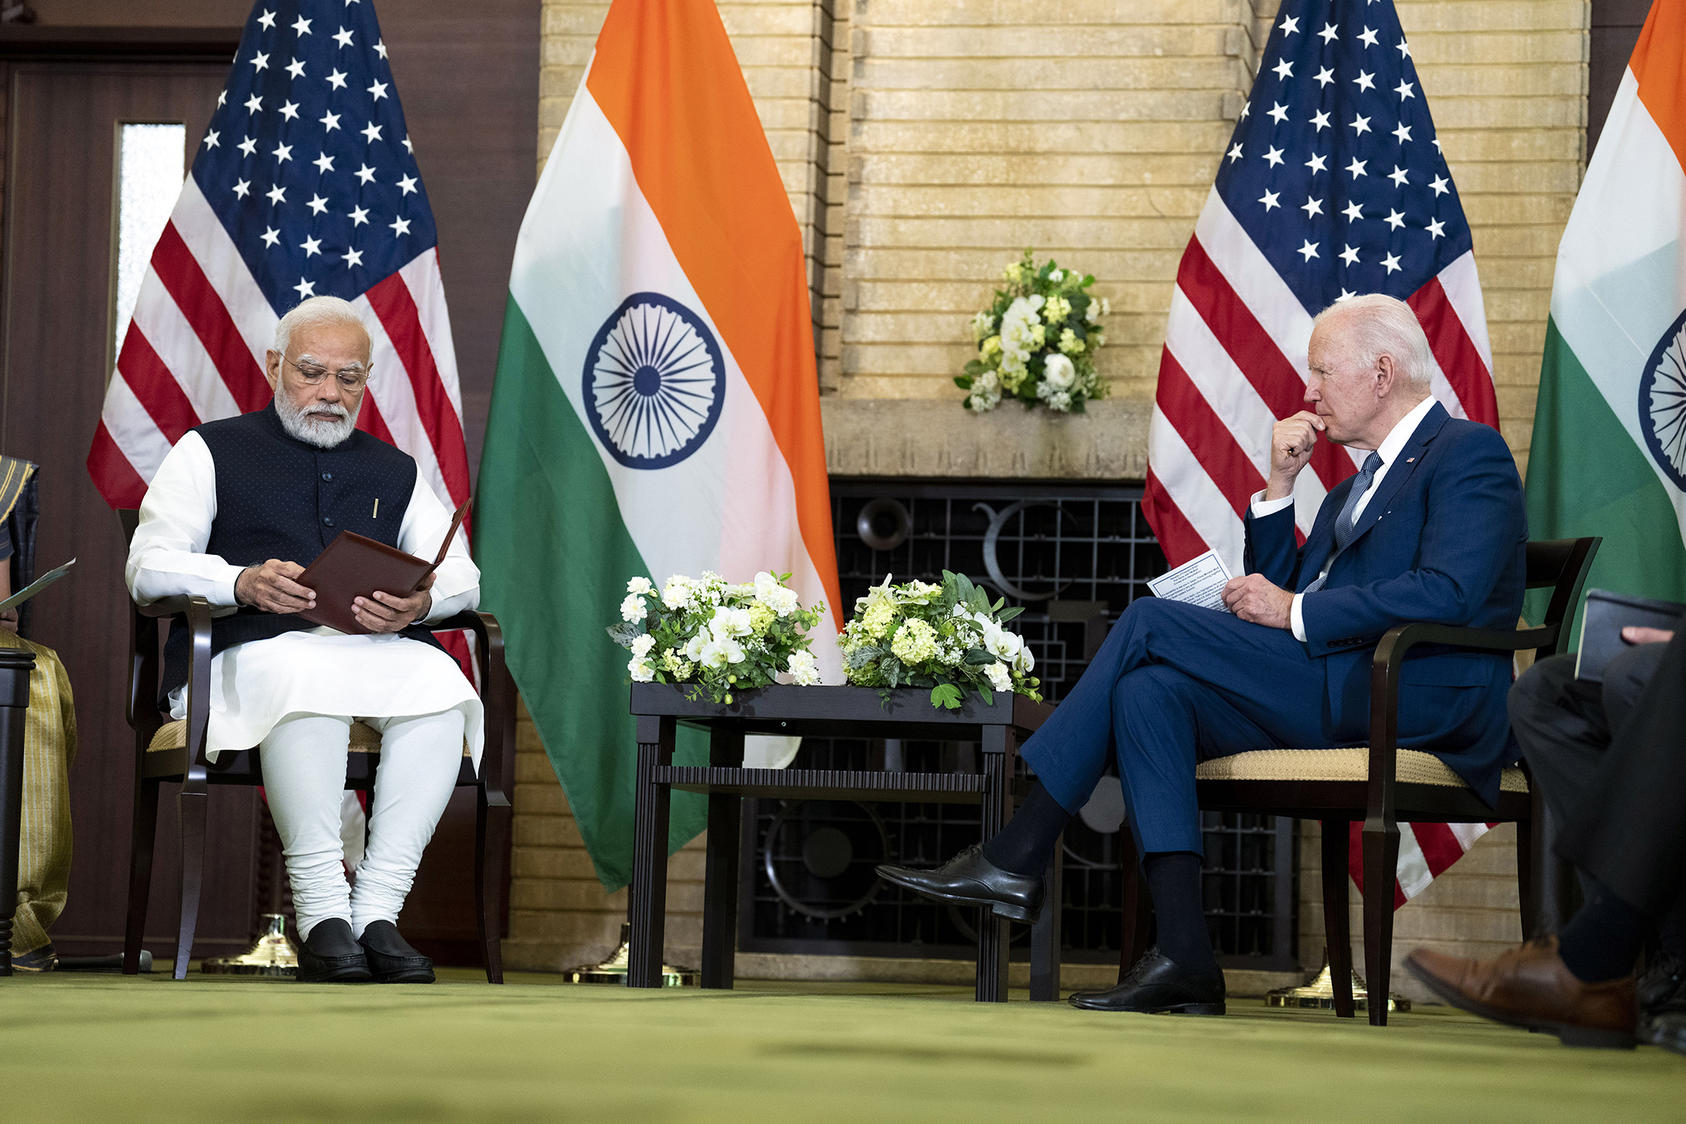 President Joe Biden meets with Prime Minister Narendra Modi of India in Tokyo, May 24, 2022. (Doug Mills/The New York Times)